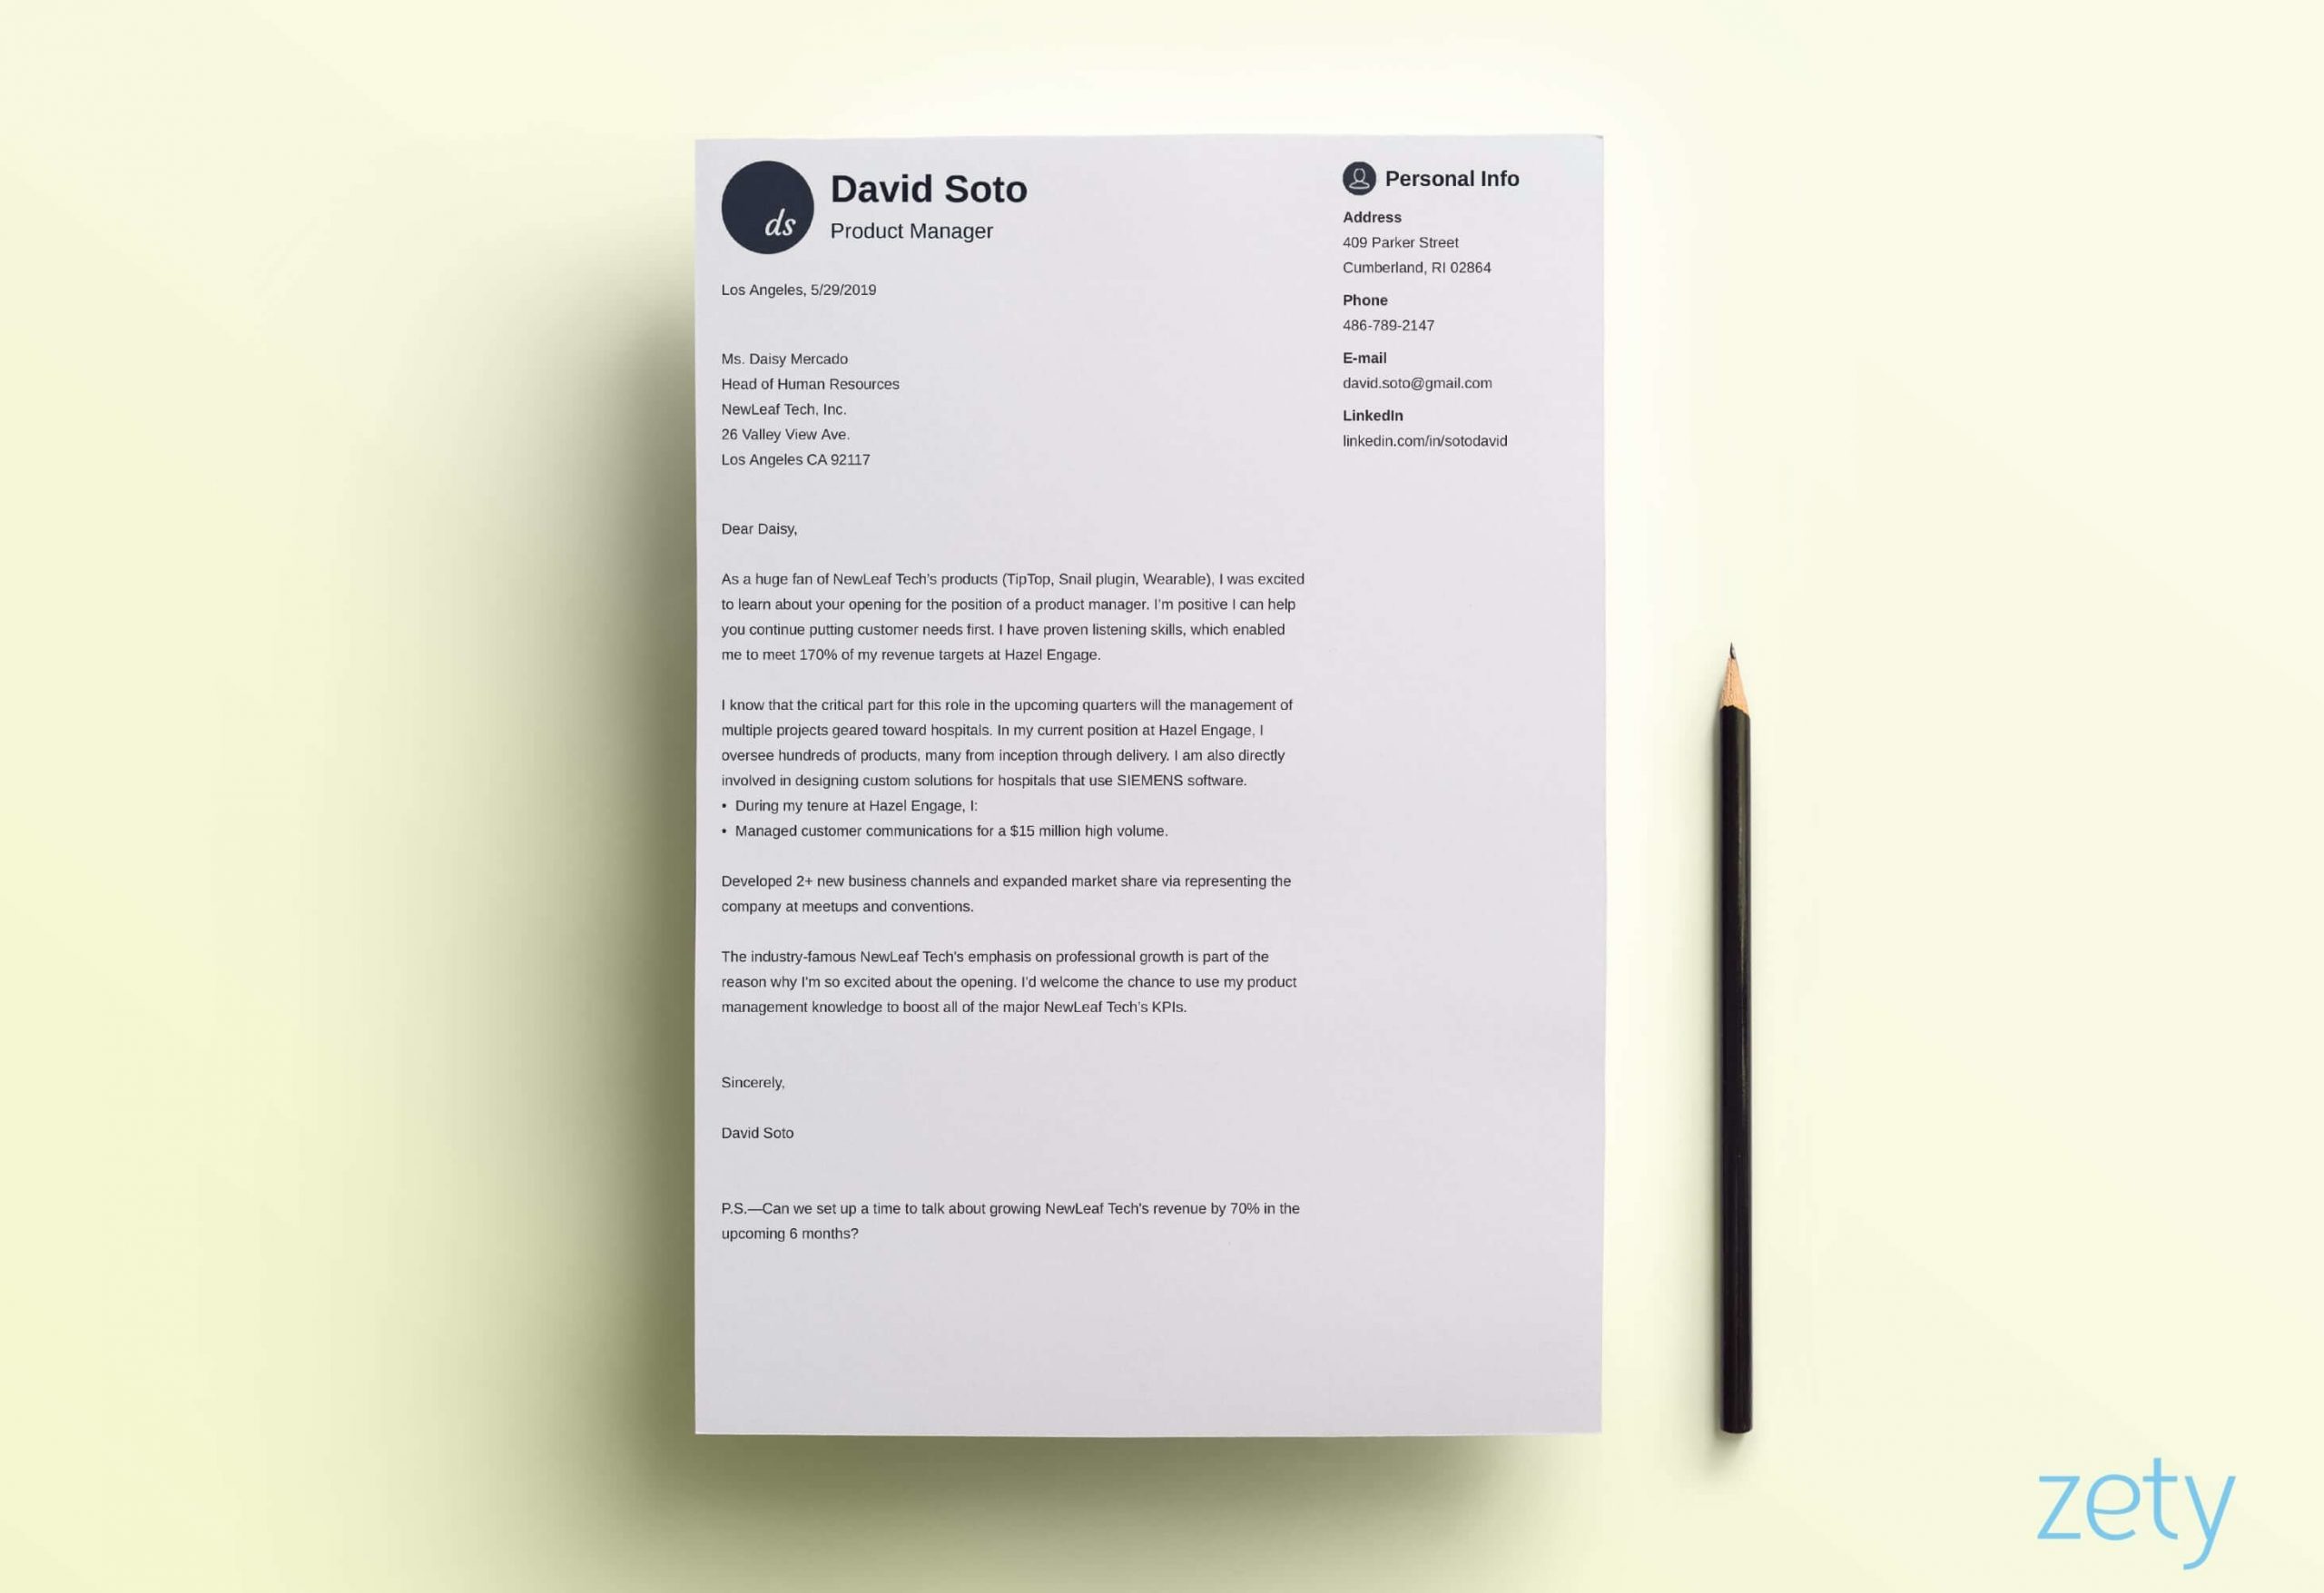 simple cover letter templates